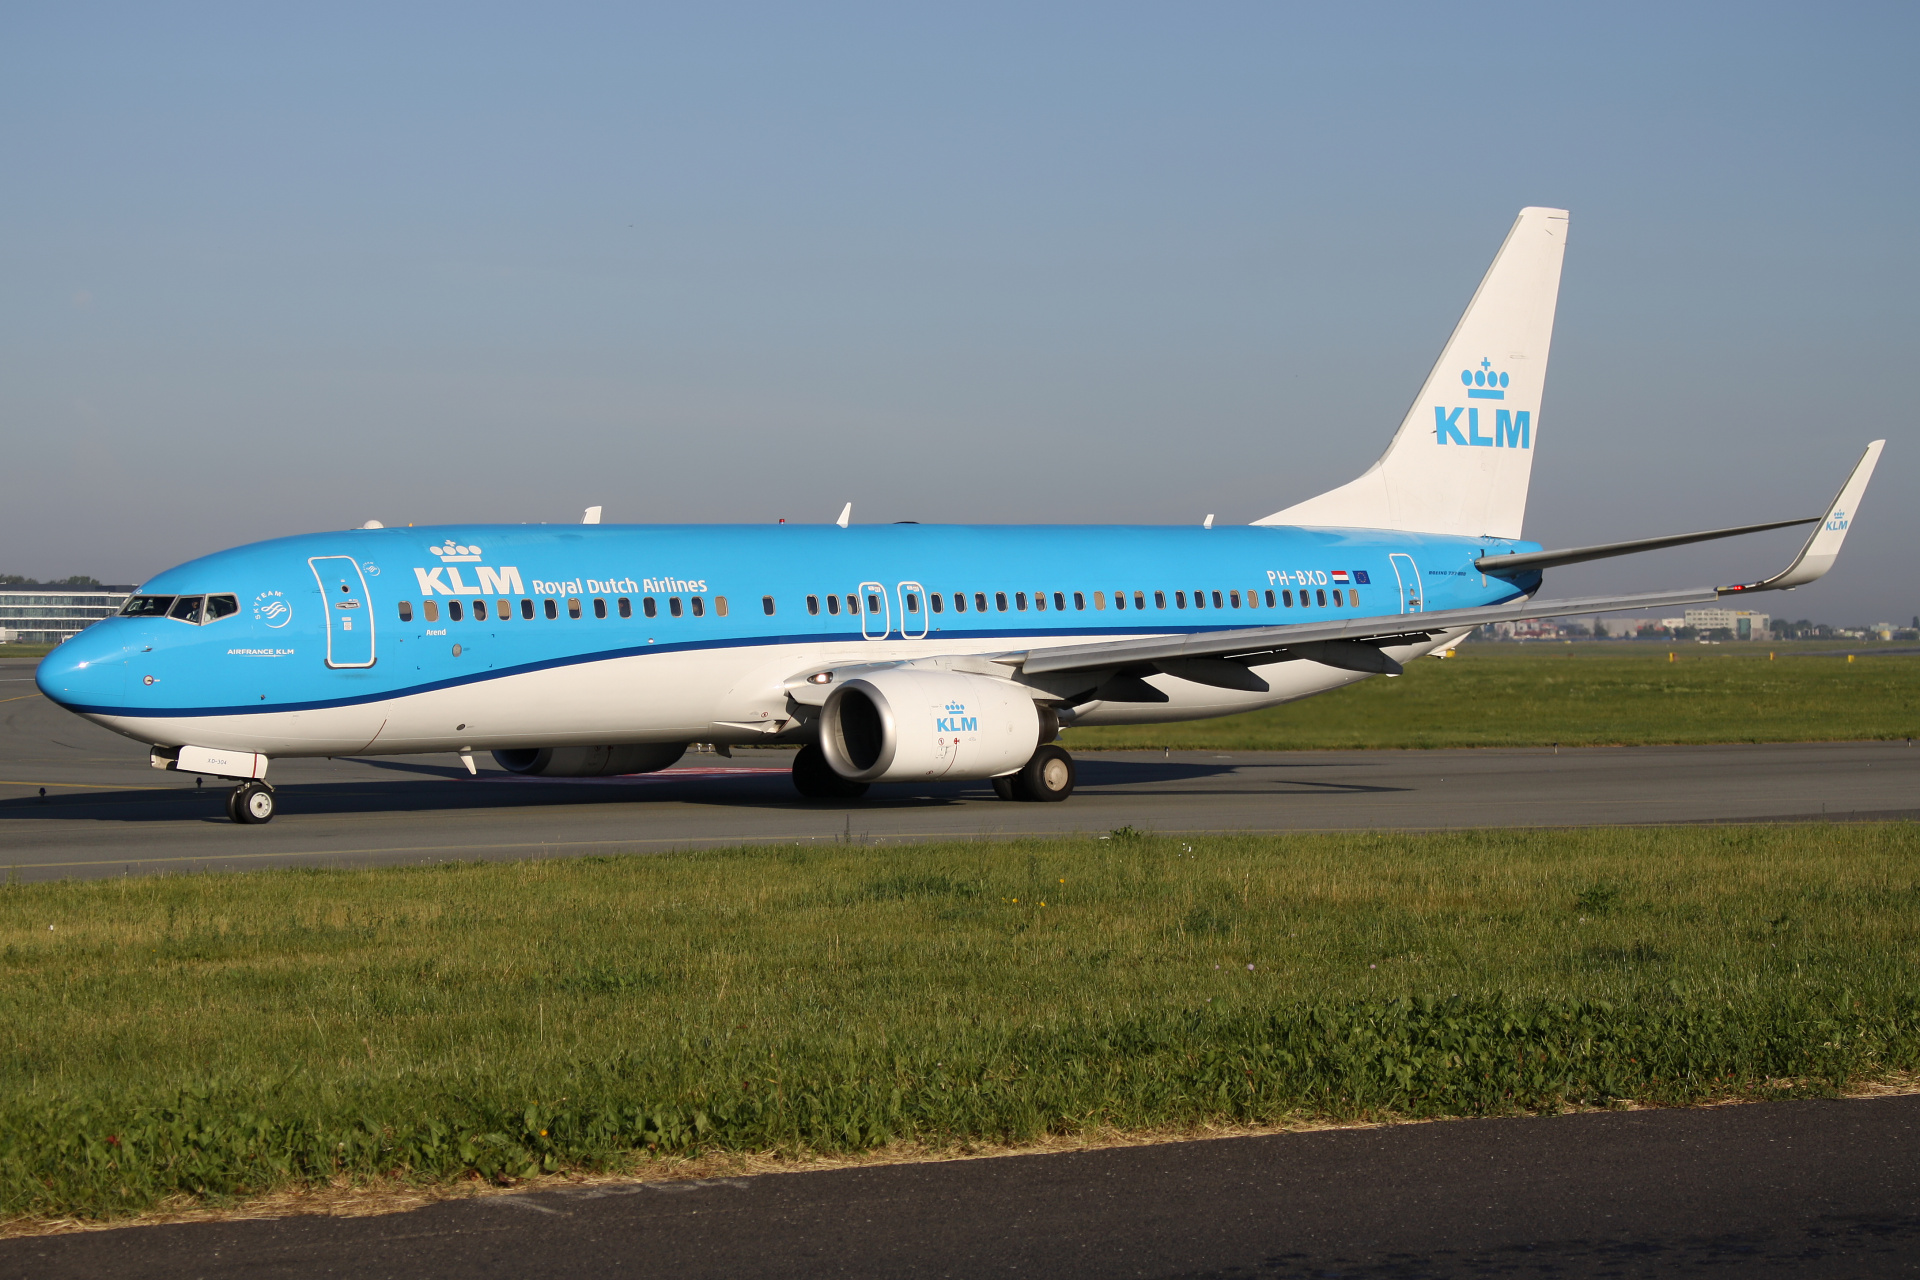 PH-BXD (Aircraft » EPWA Spotting » Boeing 737-800 » KLM Royal Dutch Airlines)